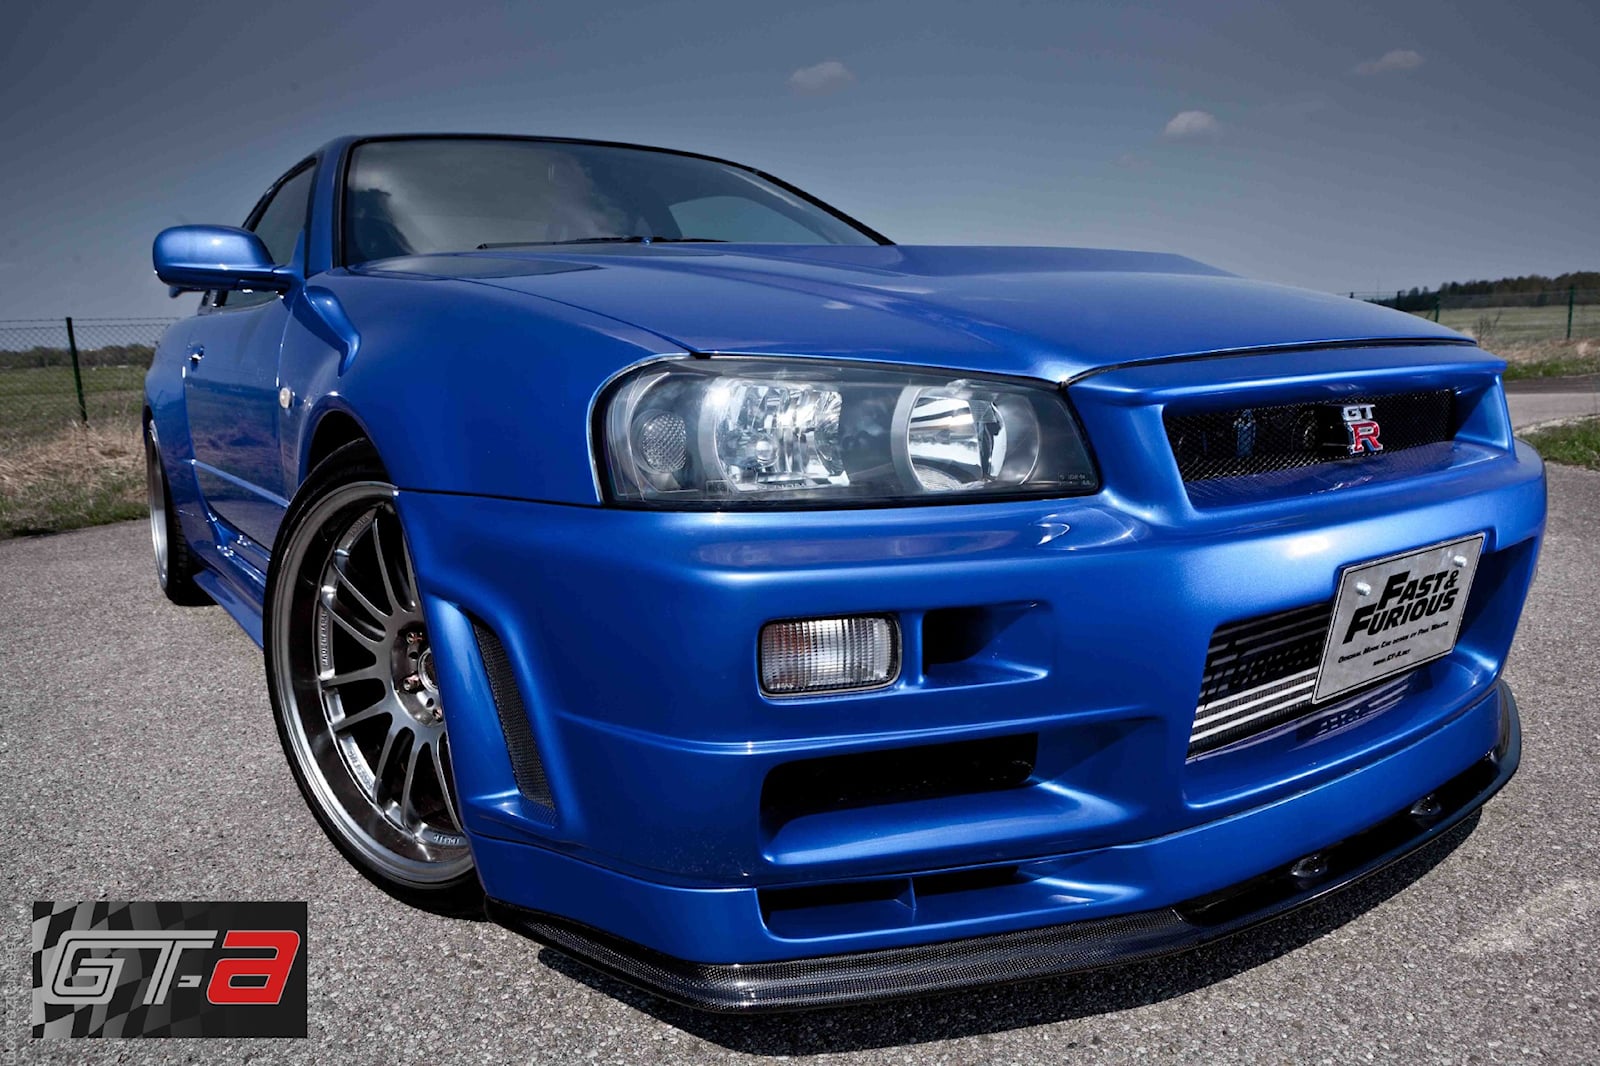 Kaizo R34 Nissan Skyline GT-R Used By Paul Walker In Fast & Furious 4 Going  Up For Sale